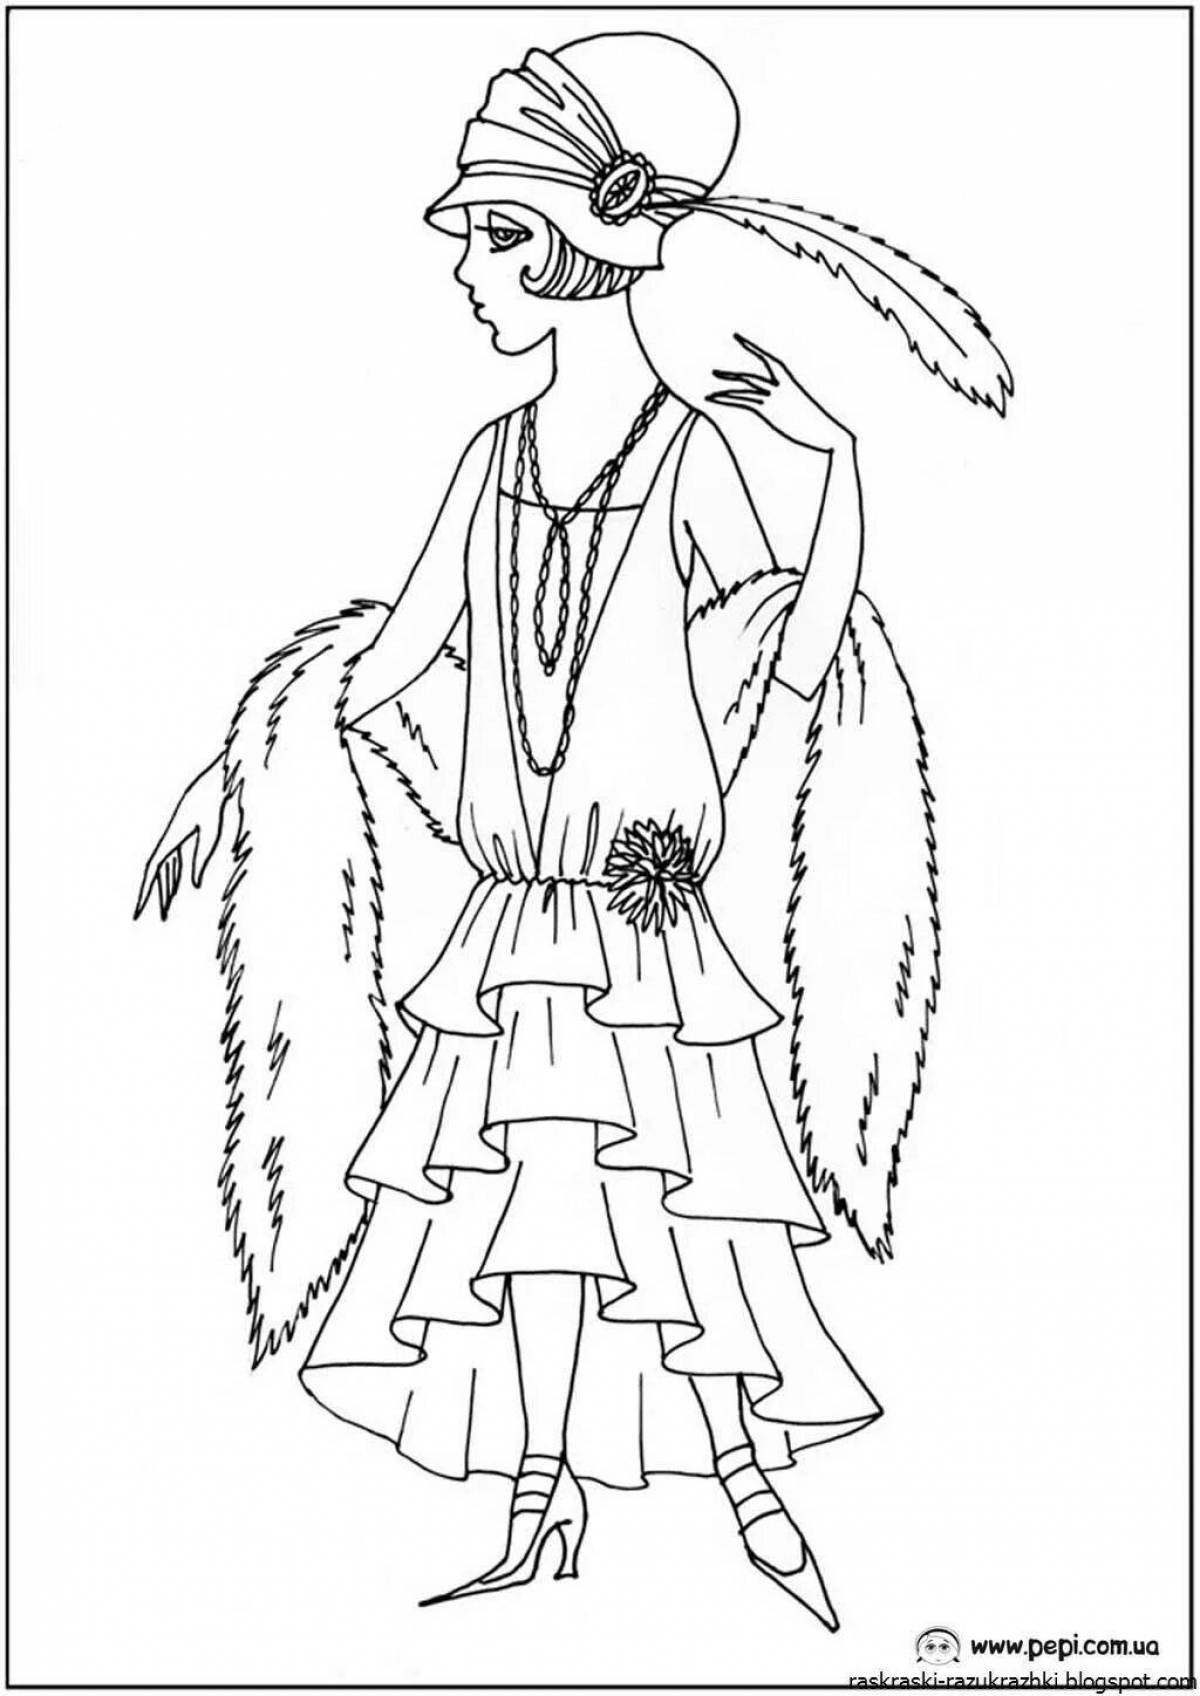 A fascinating theatrical costume coloring book